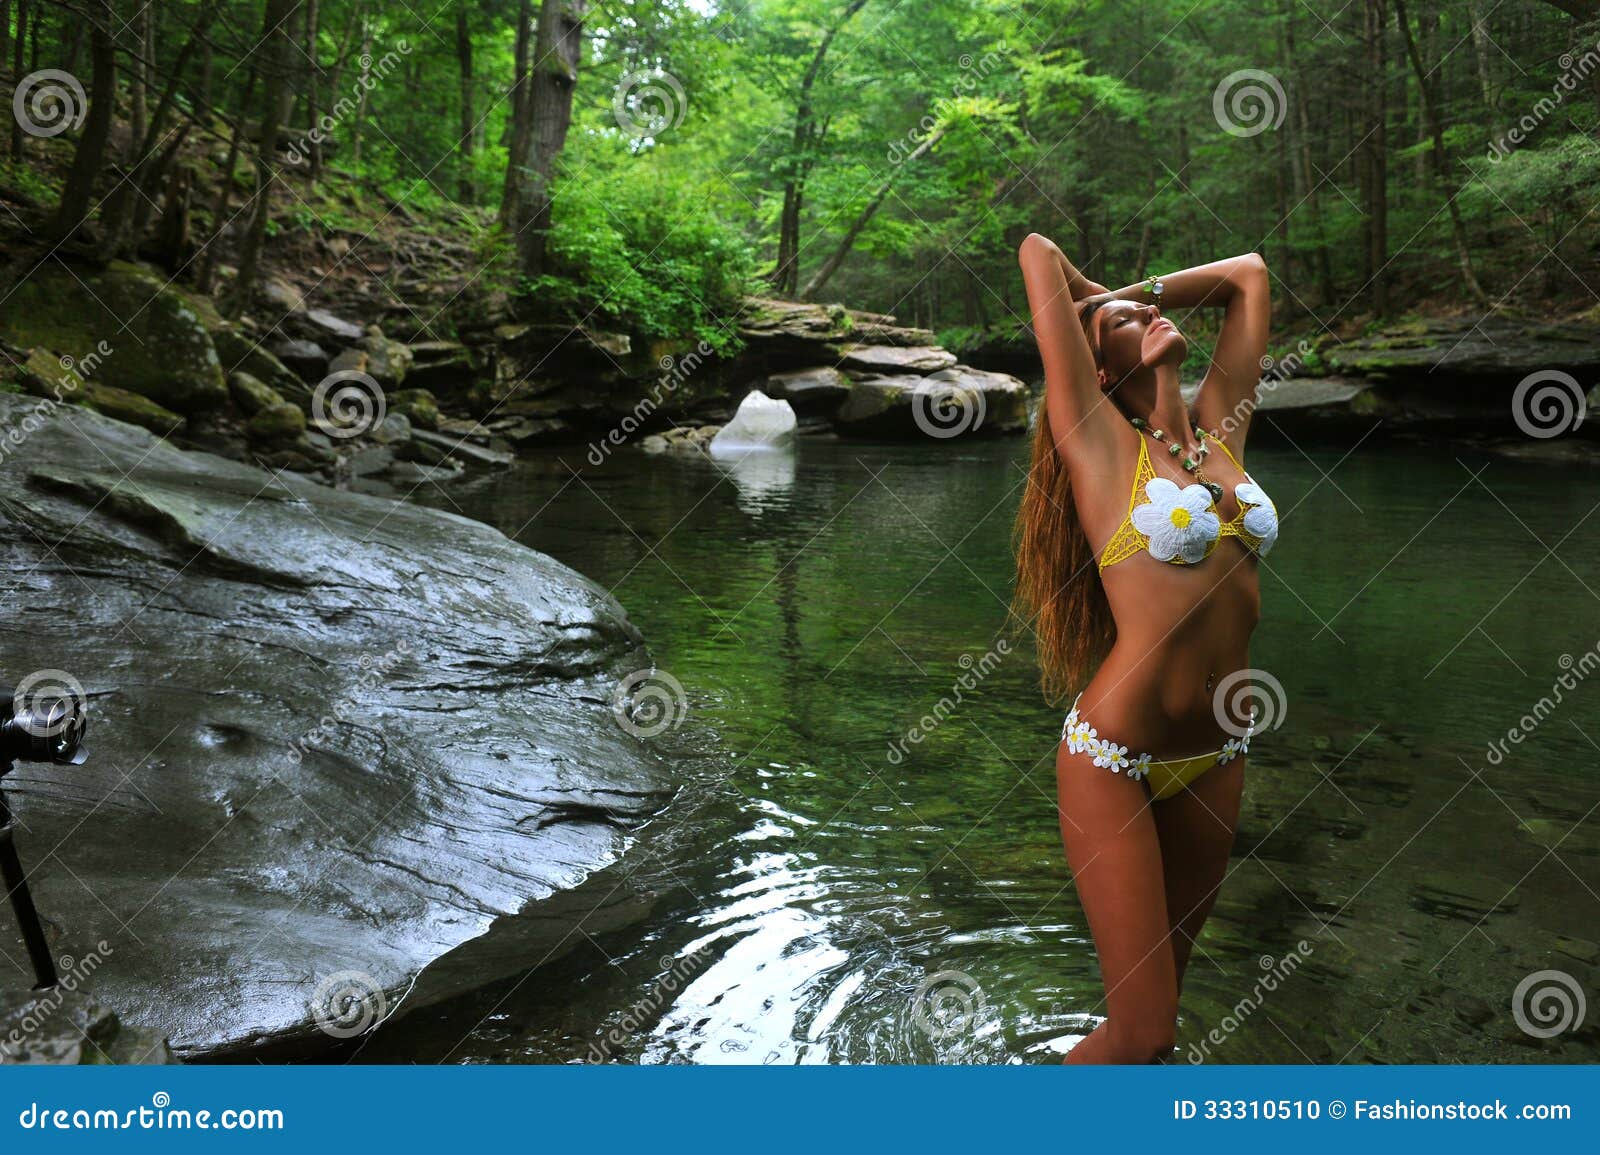 Young Girl In Bikini Doing Stretching Exercises Beside A River At Sunset  Stock Photo, Picture and Royalty Free Image. Image 22017515.